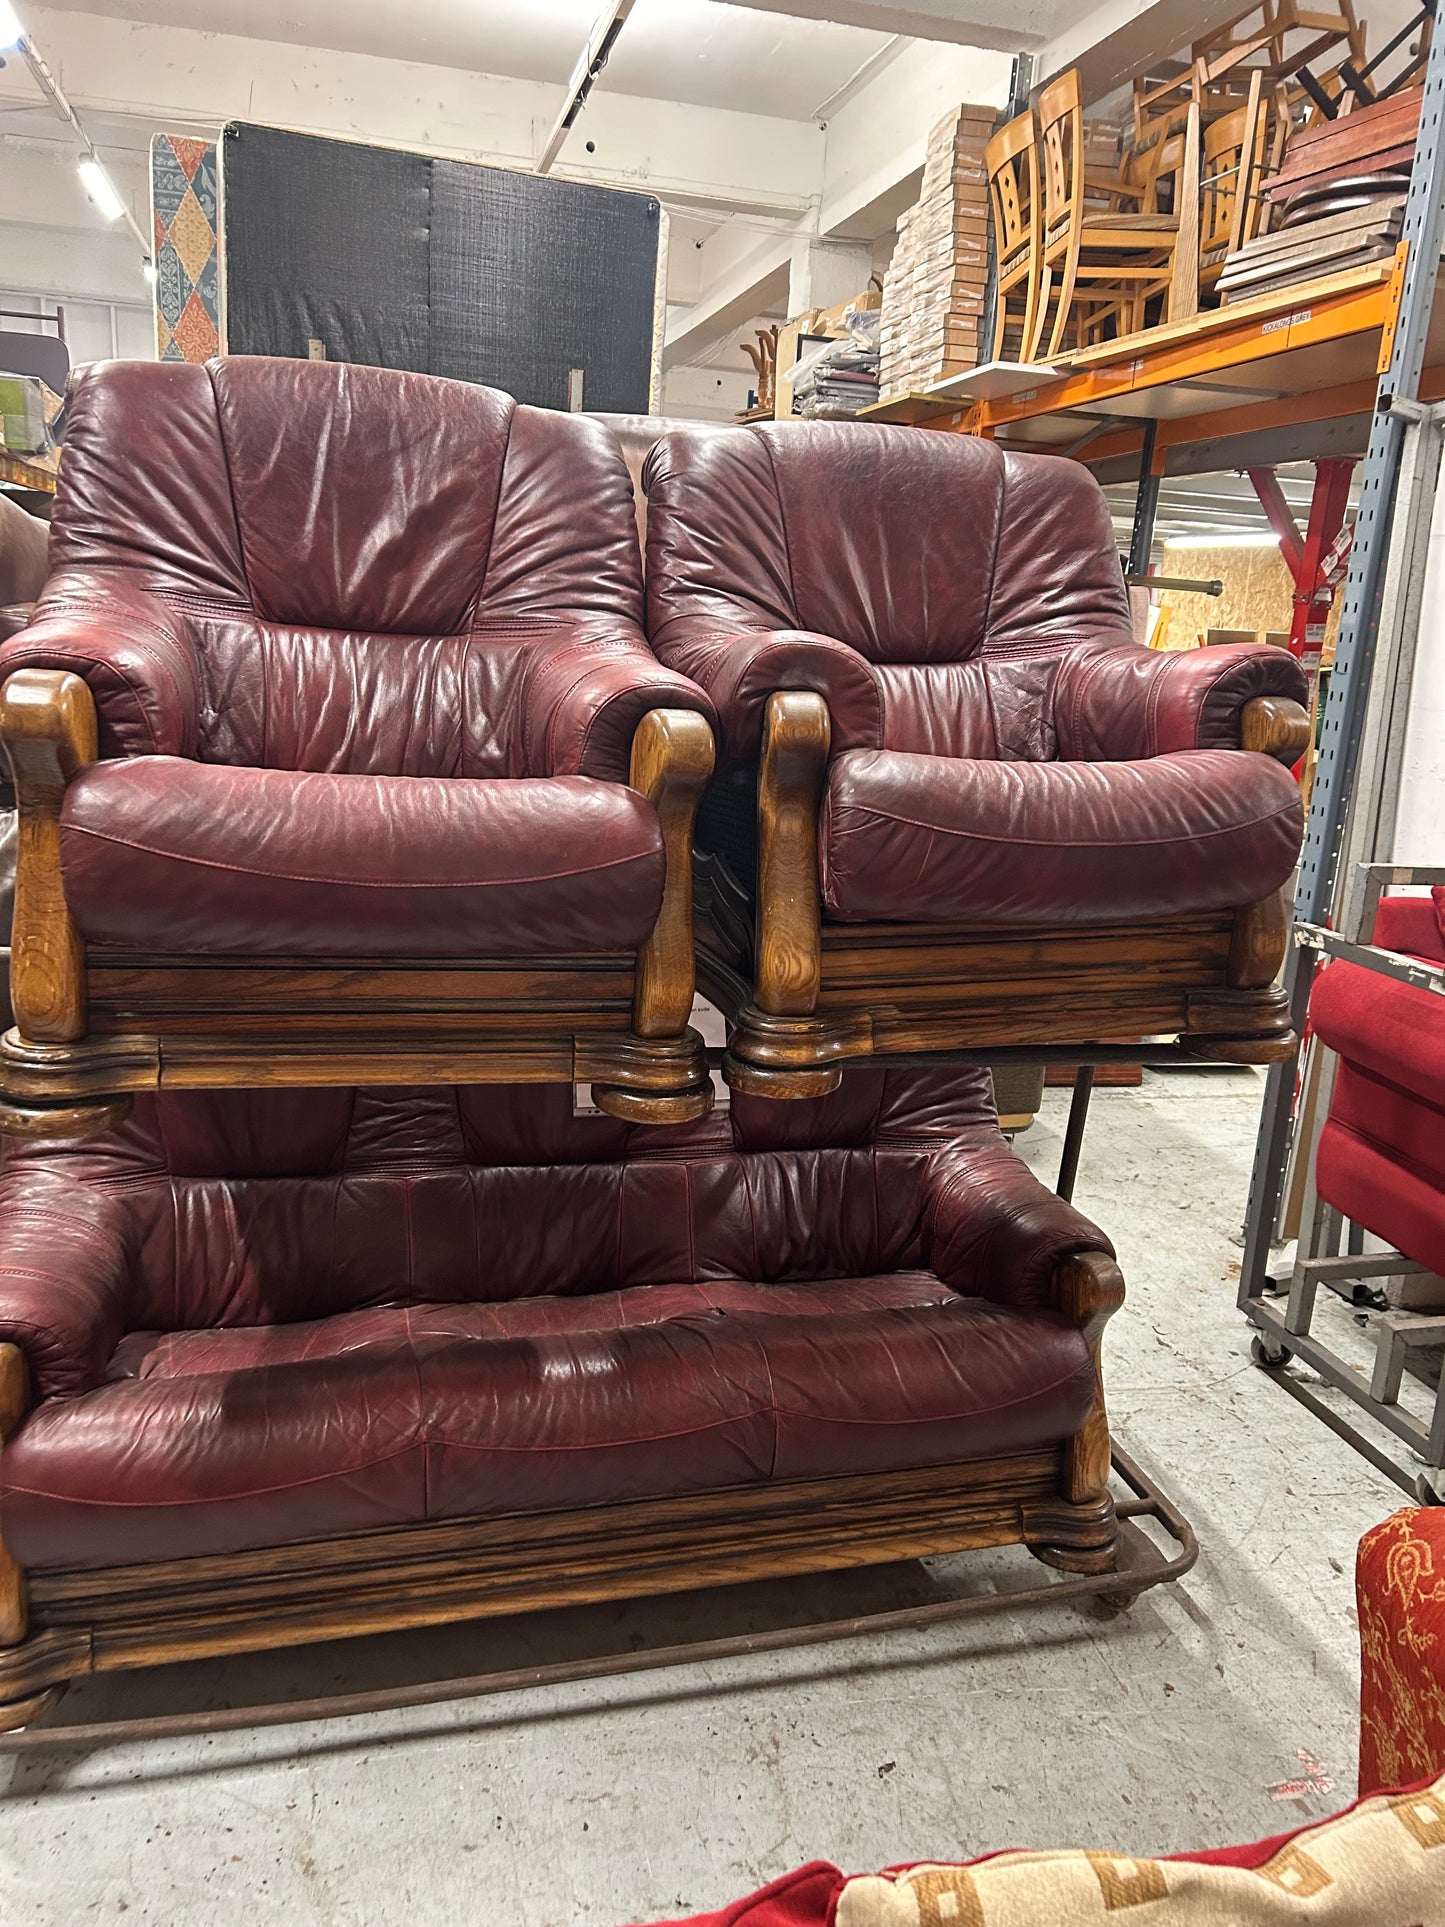 3+1+1 solid oak framed suite, wine leather cushion suite  Q3223
WAS 295.00
NOW 125.00 - (with damage)